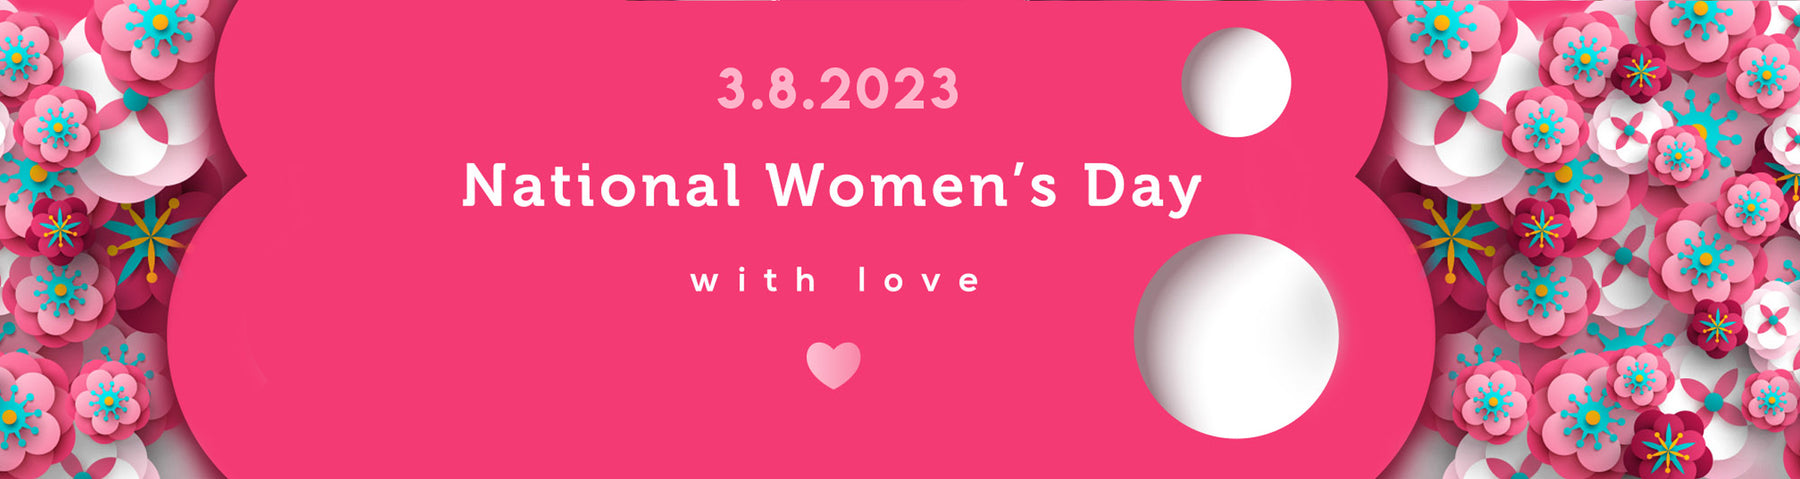 National Women's Day: March 8th